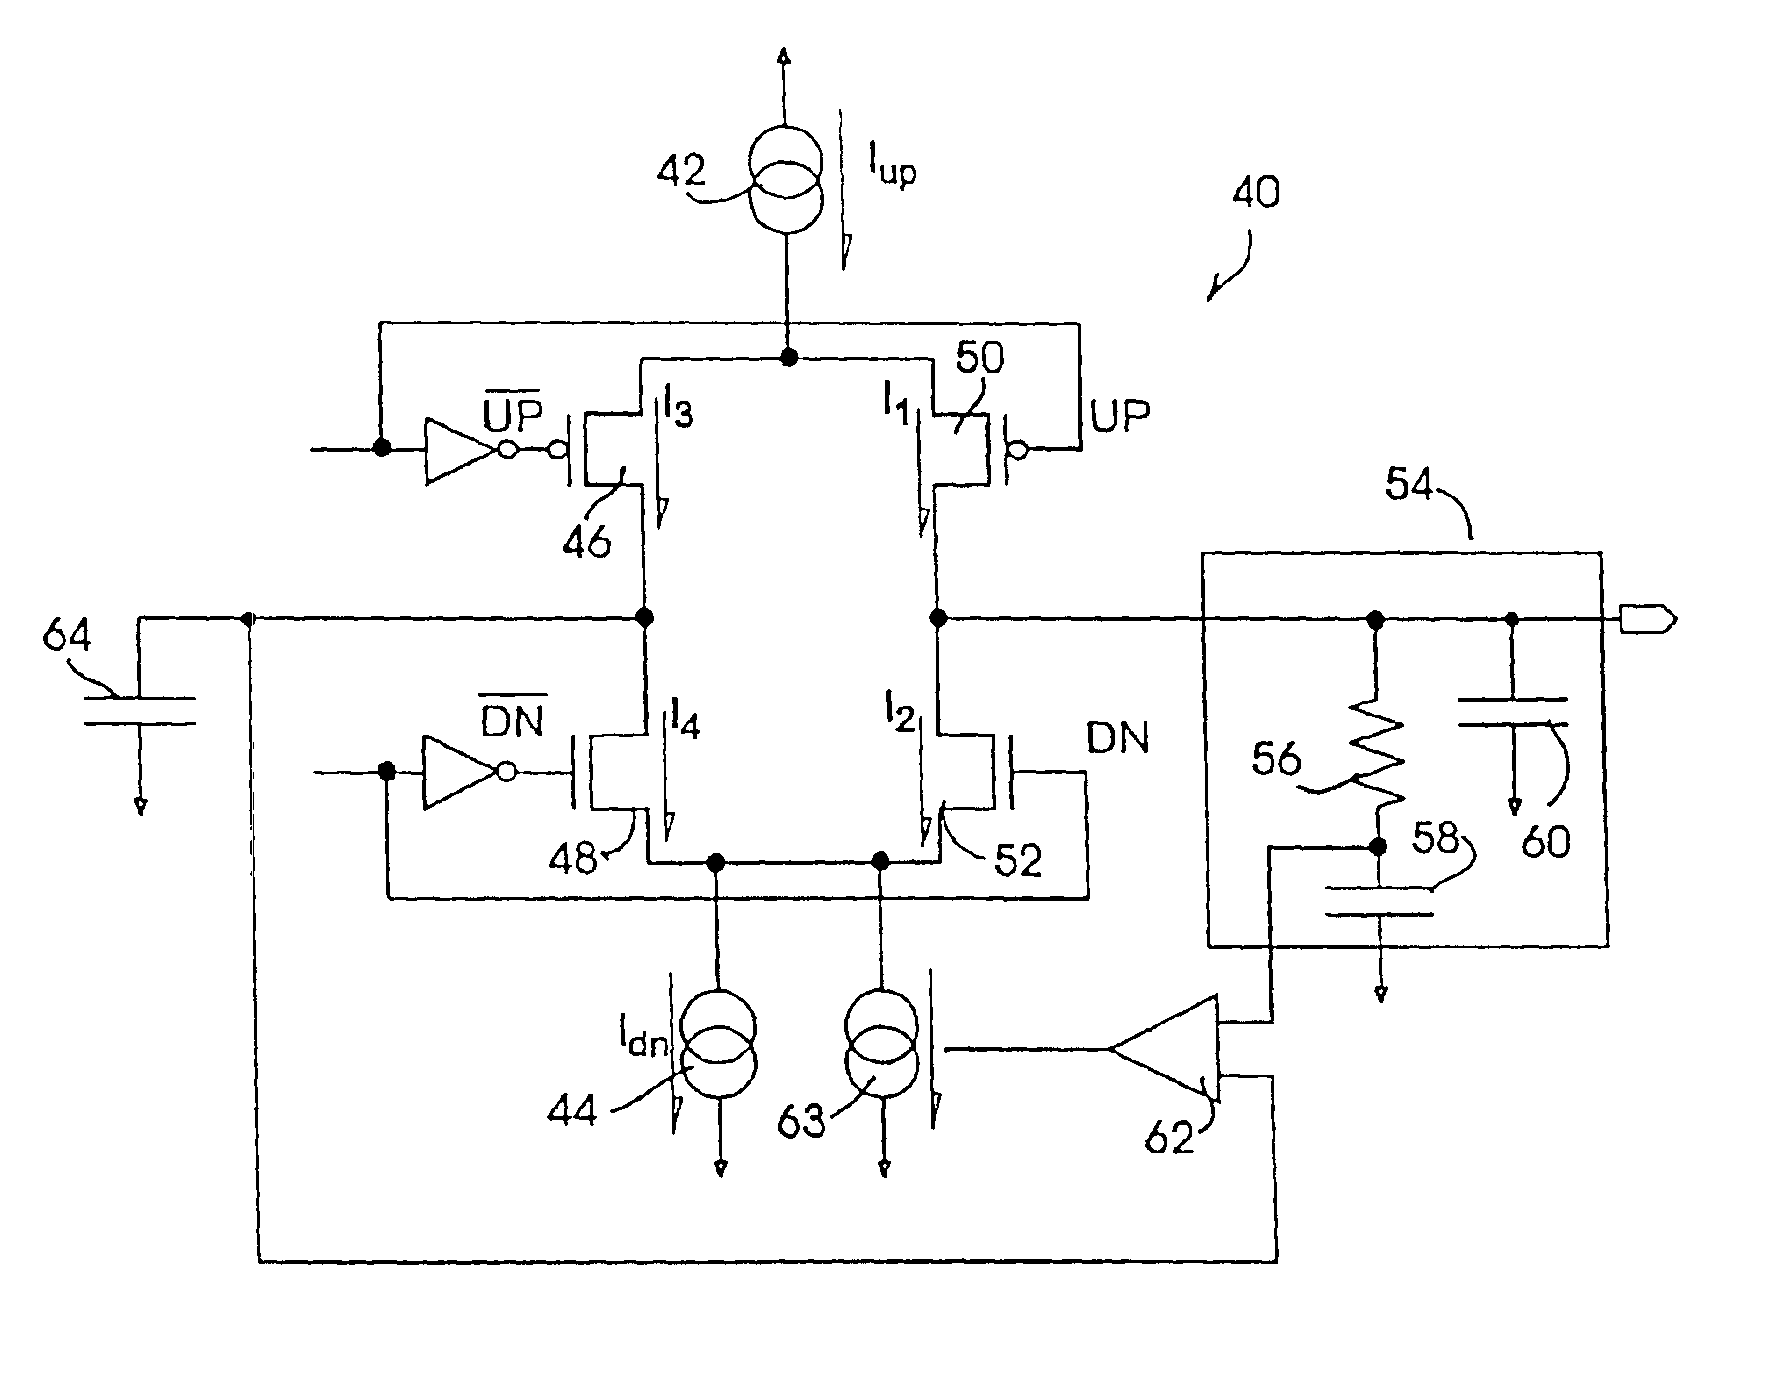 Low offset and low glitch energy charge pump for PLL-based timing recovery systems